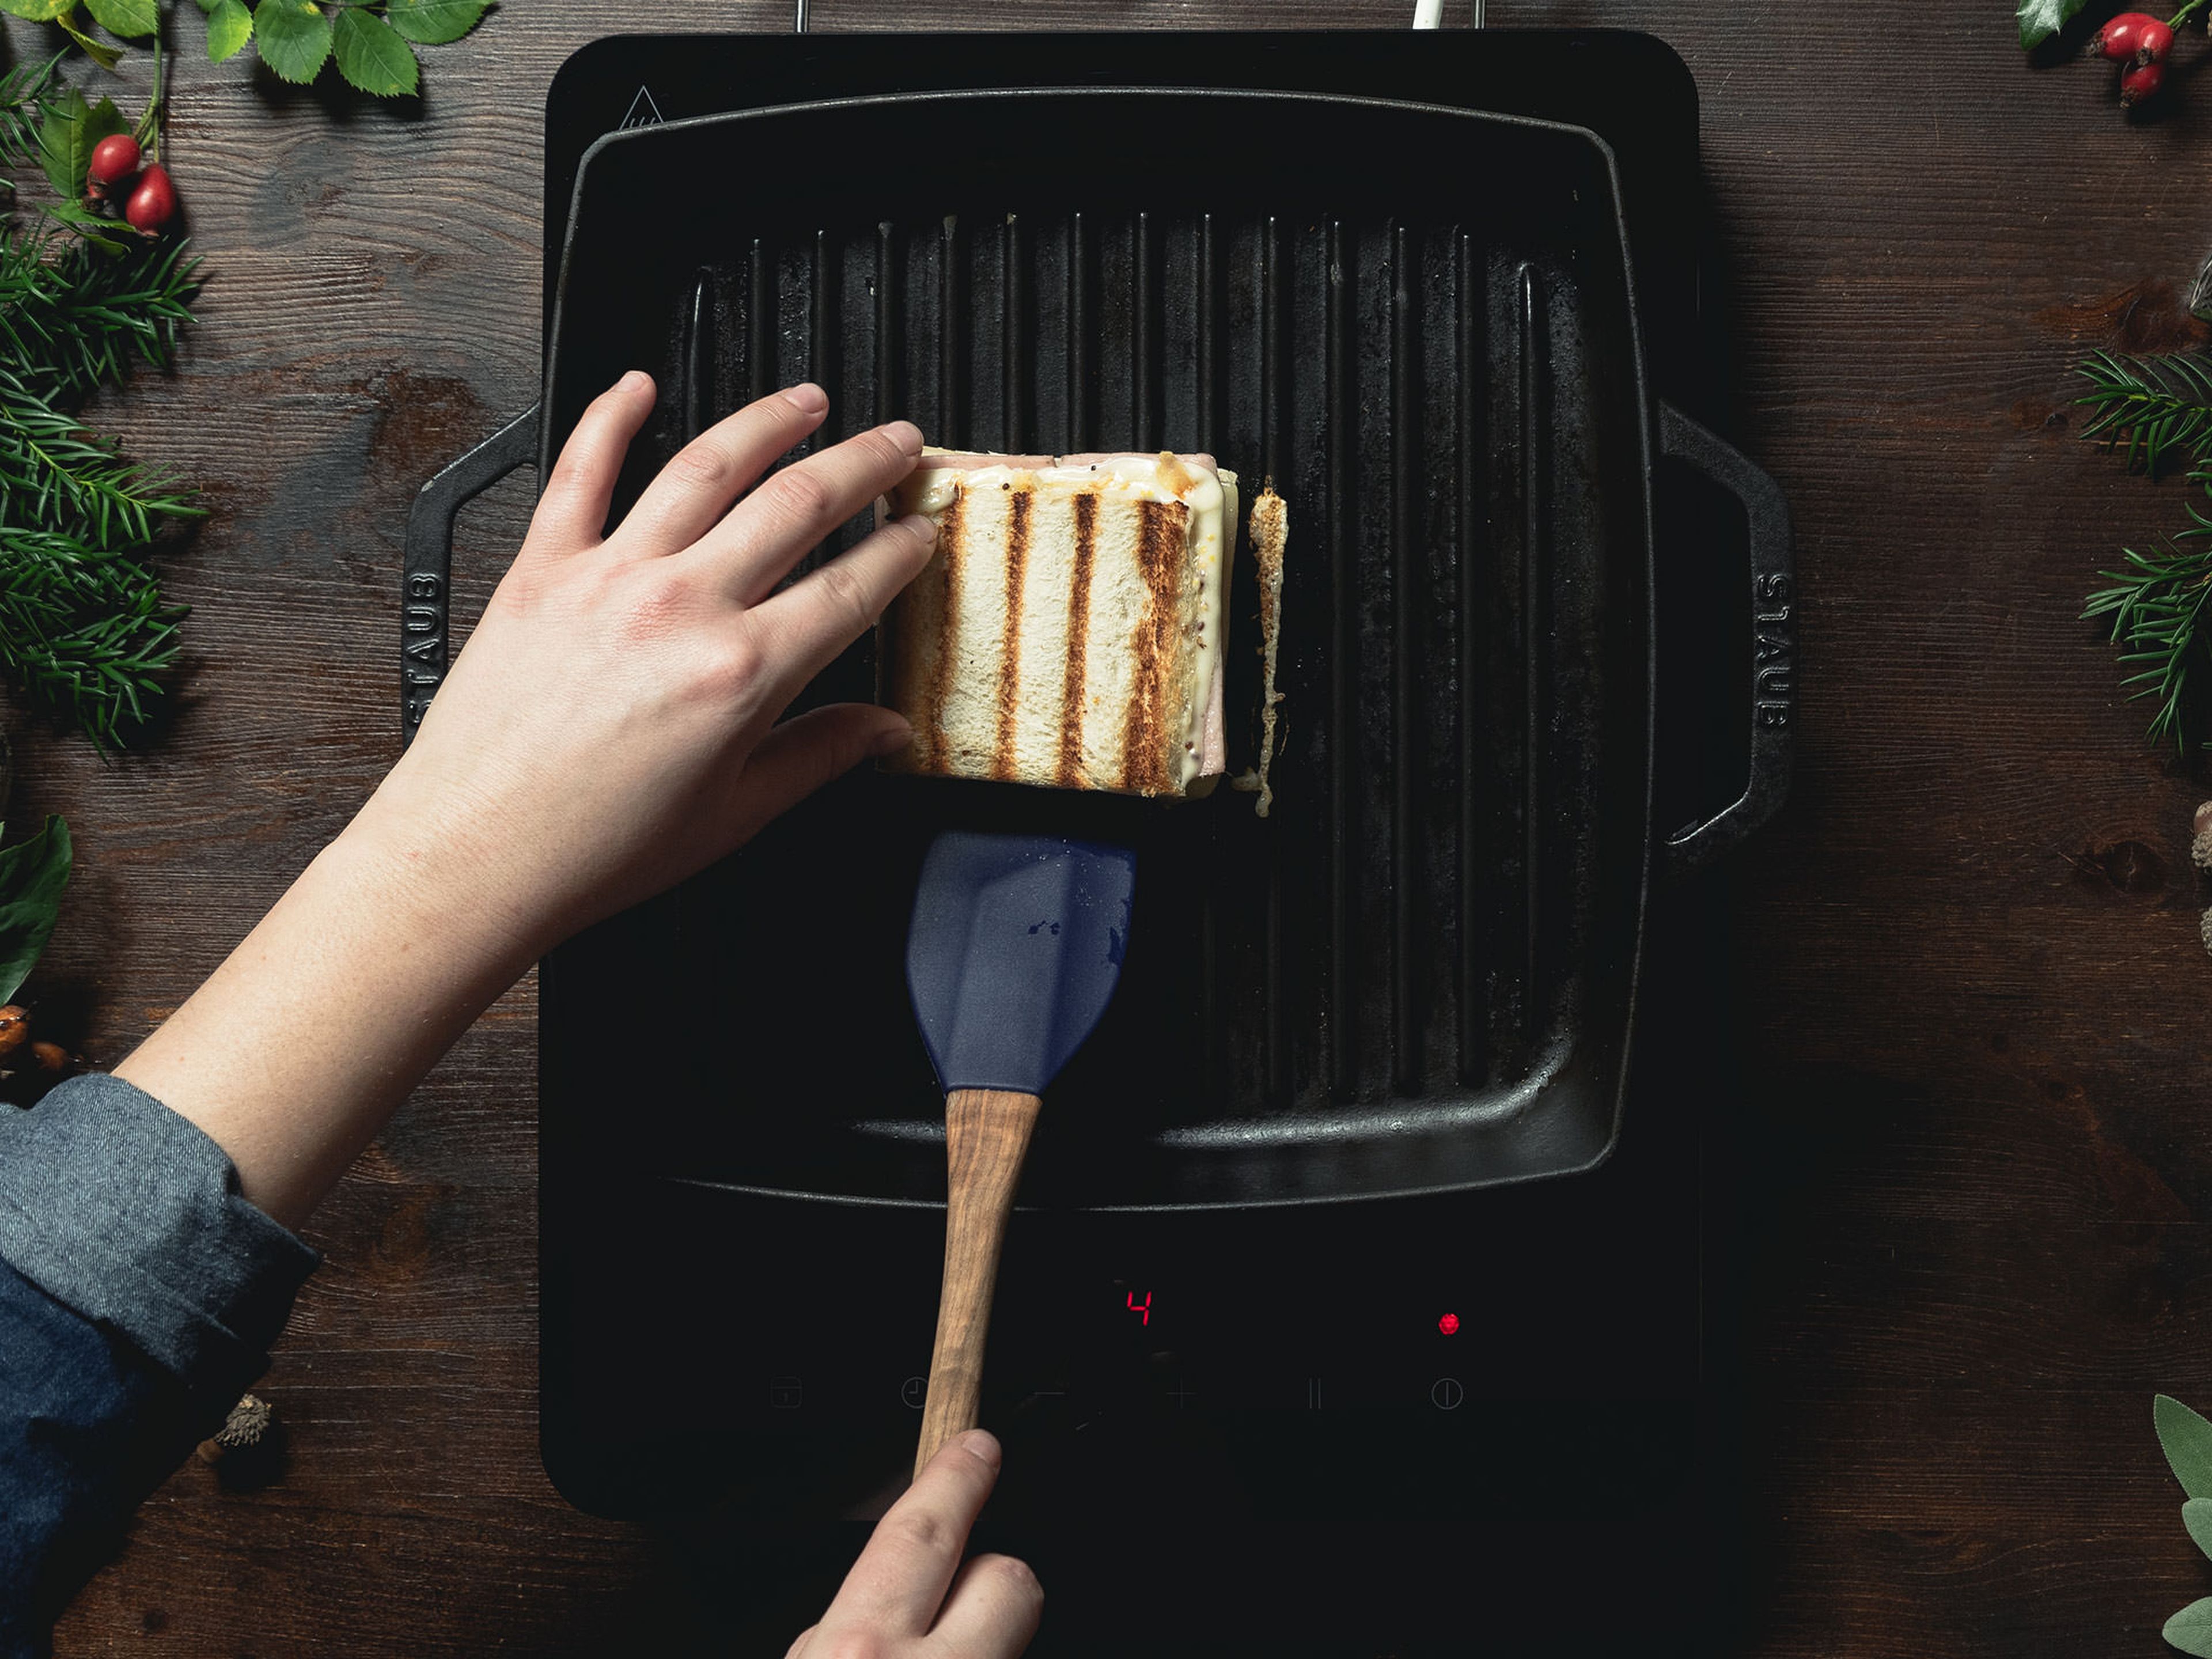 Heat an oiled grill pan over medium-high heat. Grill each sandwich on both sides until golden brown.